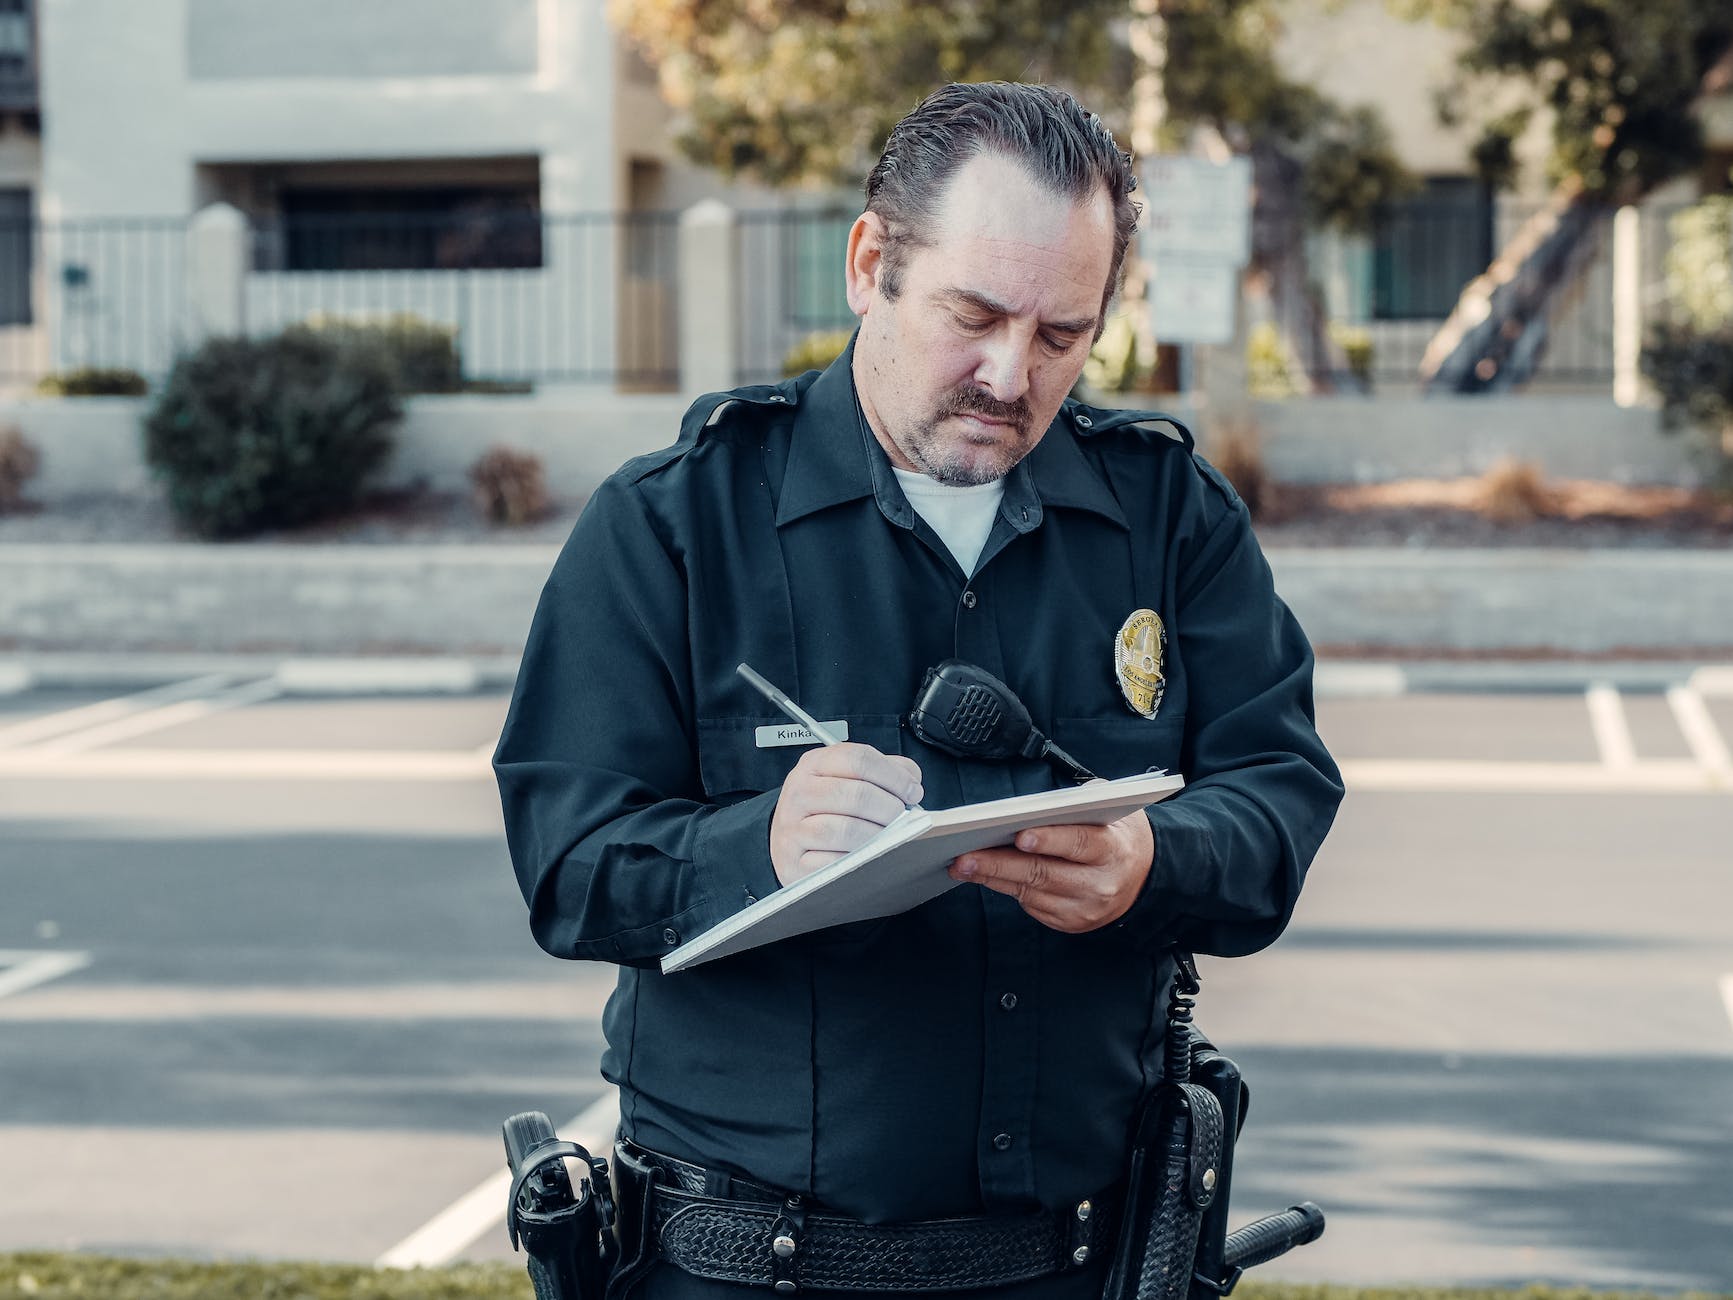 What is a Public Safety Officer